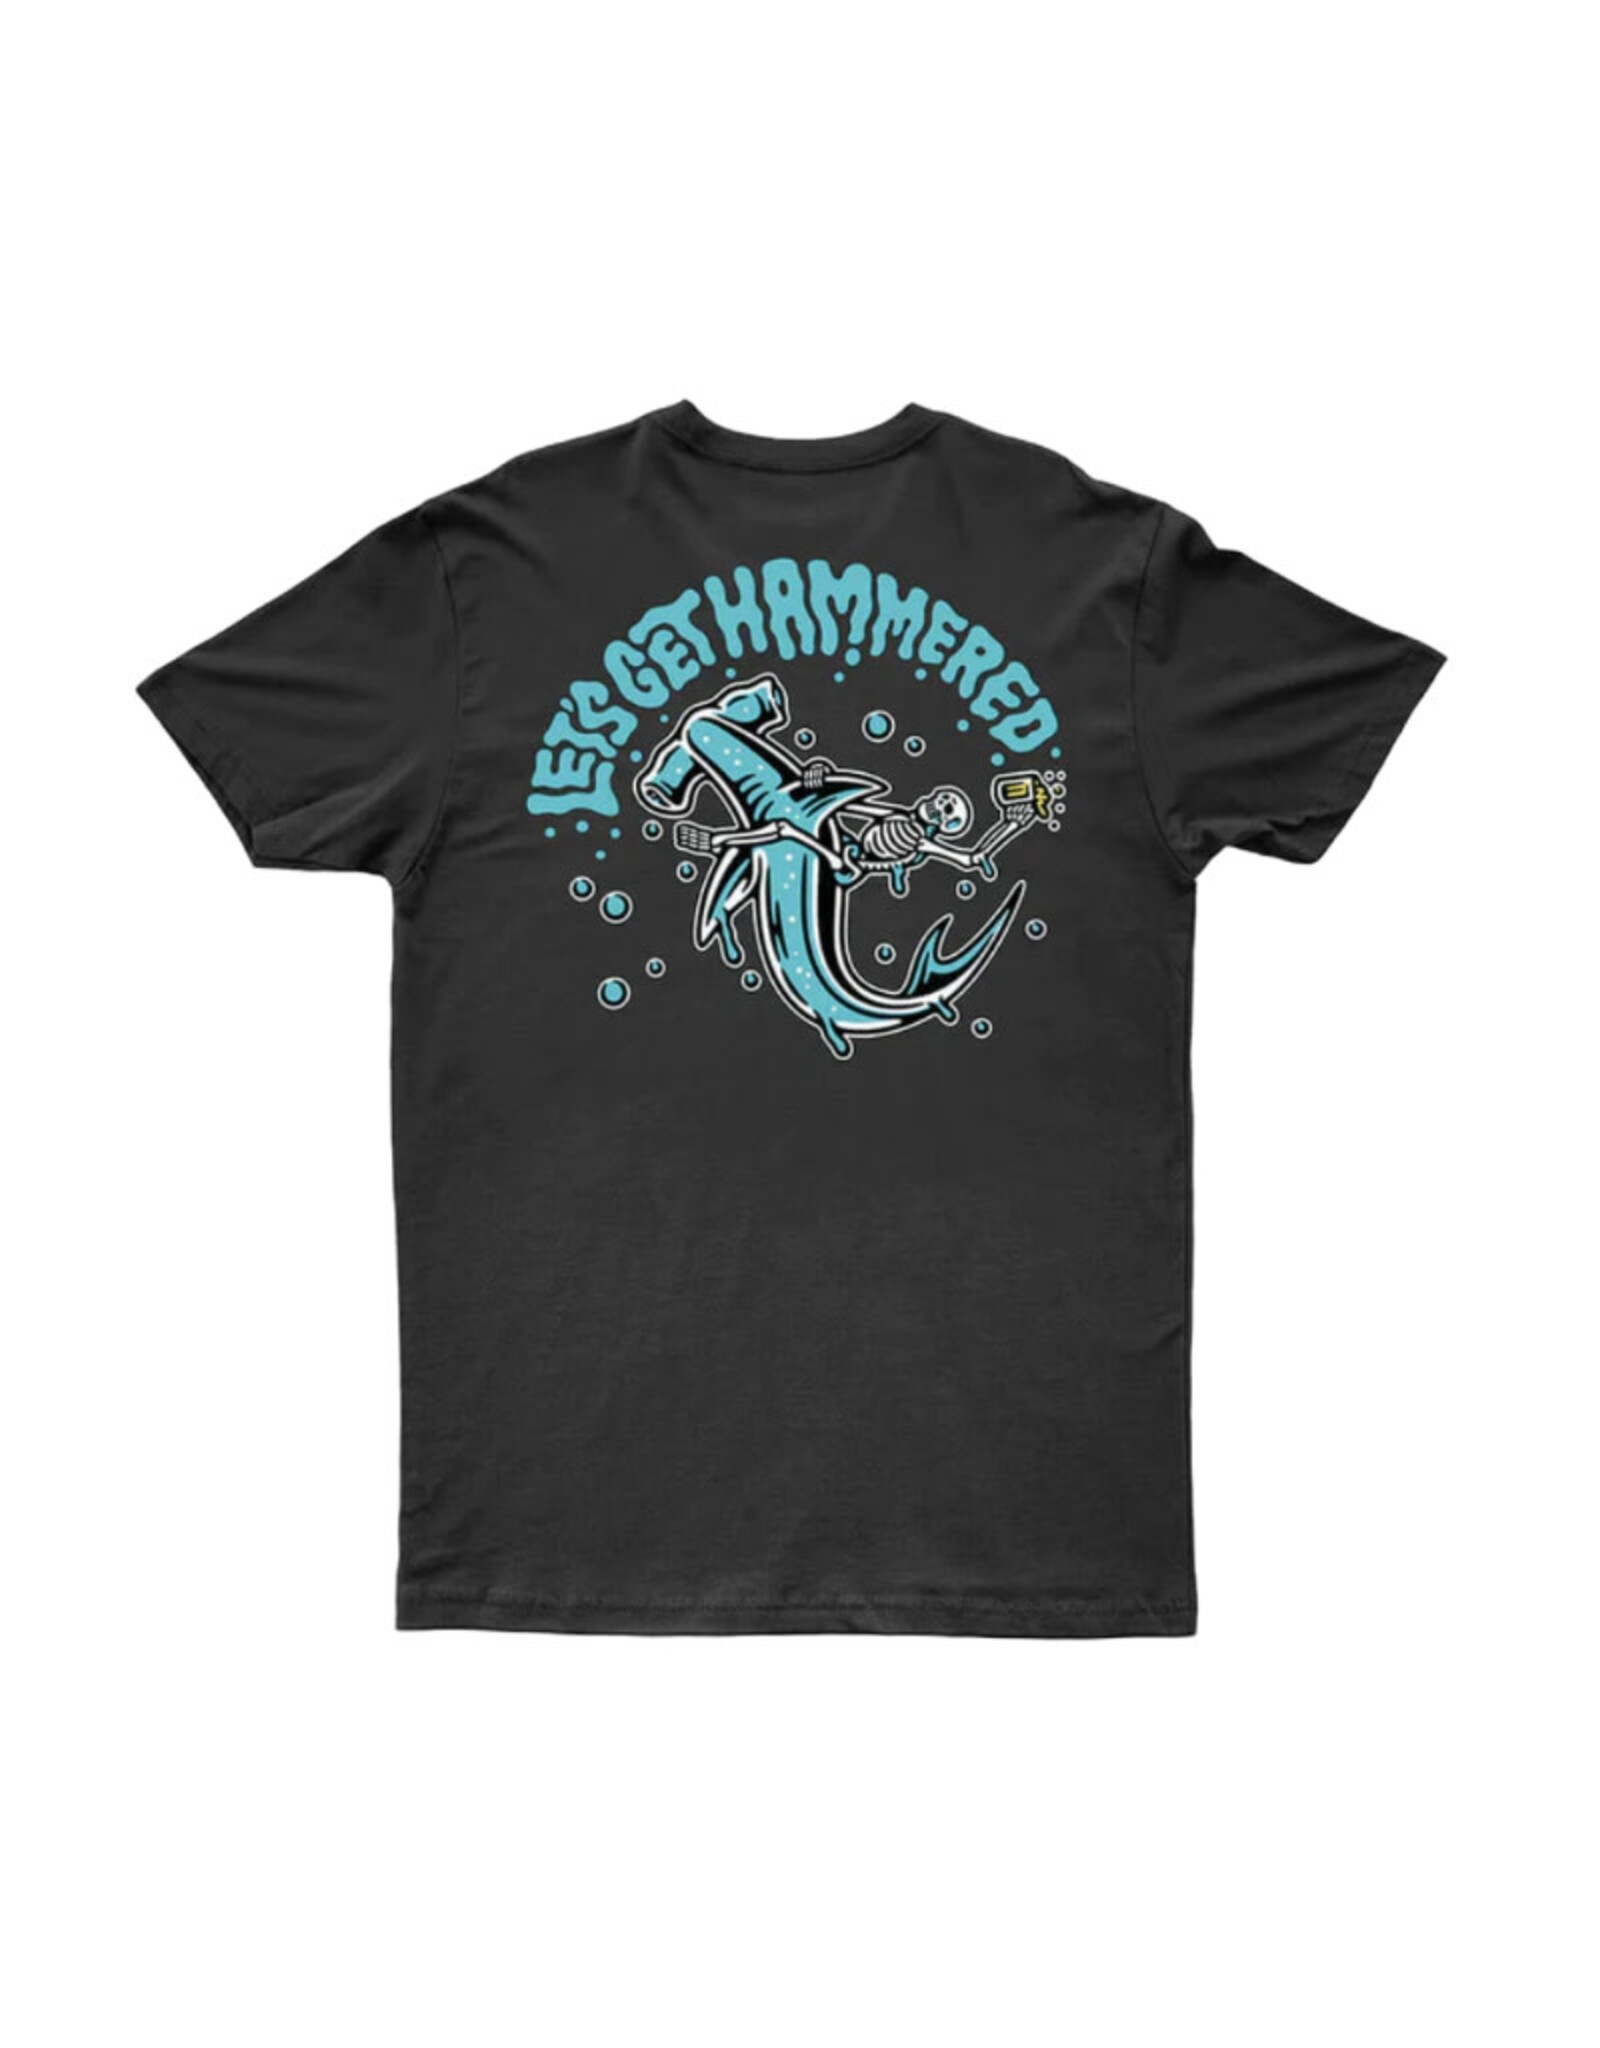 Cove Cove Let's Get Hammered Tee Black